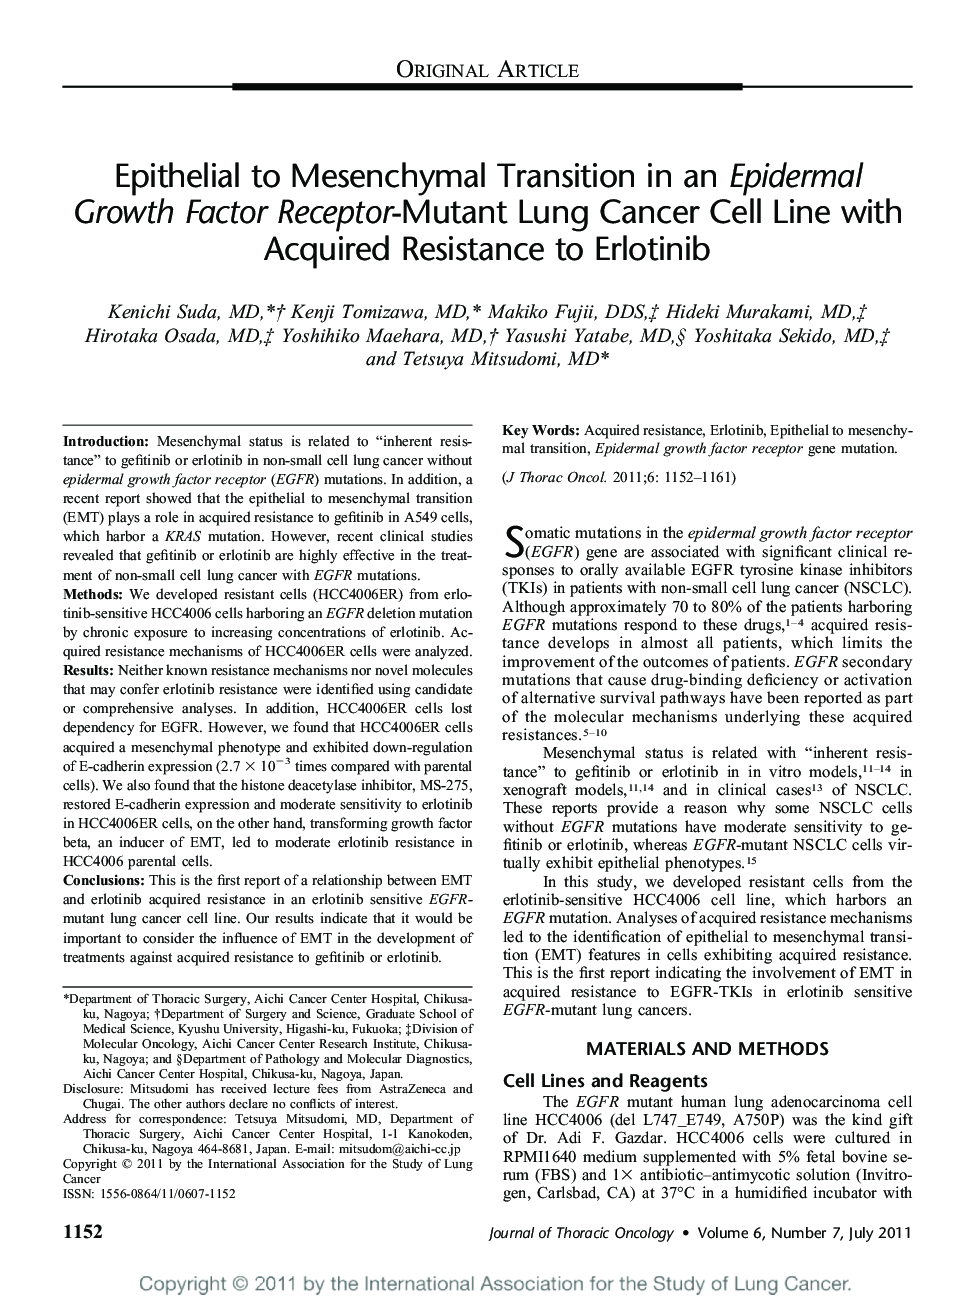 Epithelial to Mesenchymal Transition in an Epidermal Growth Factor Receptor-Mutant Lung Cancer Cell Line with Acquired Resistance to Erlotinib 